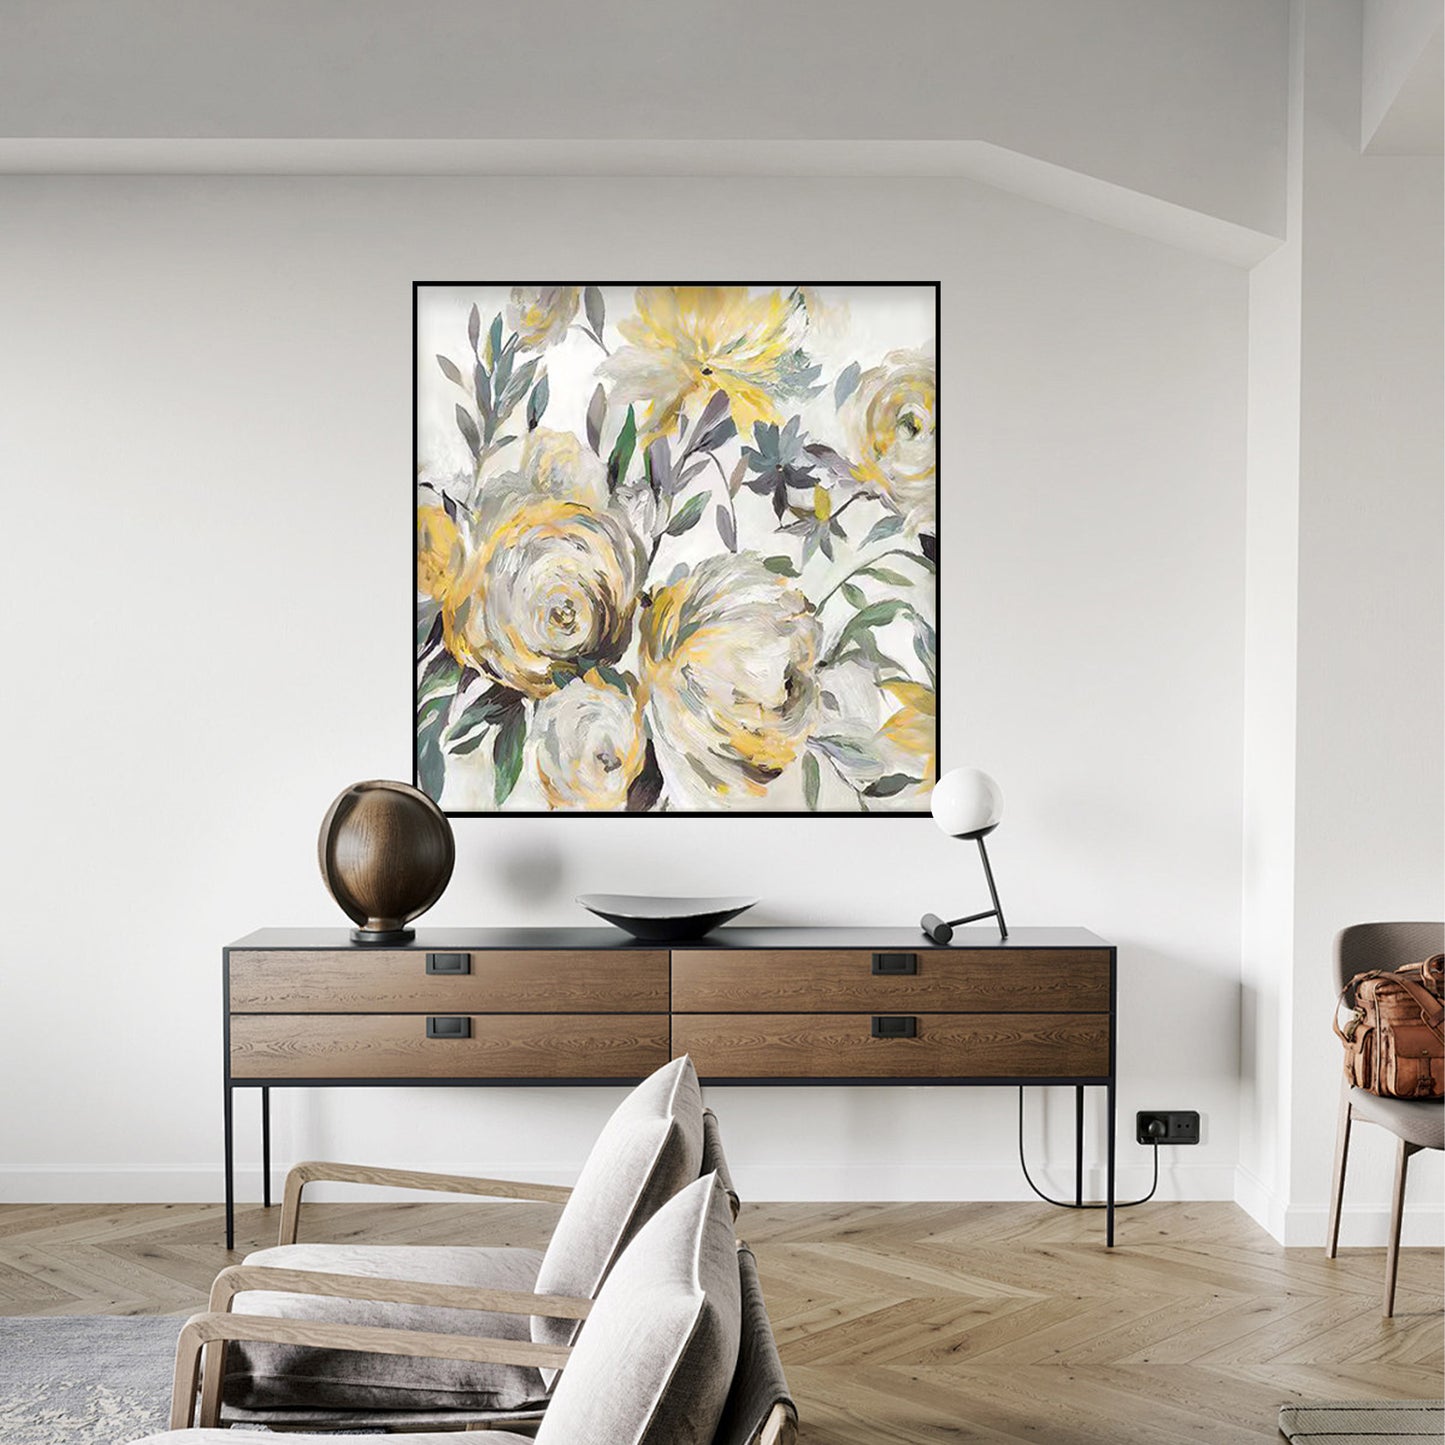 SET OF 3, IMPRESSIONISM FLOWER PAINTING, HAND-PAINTED CANVAS, YELLOW BLOOM